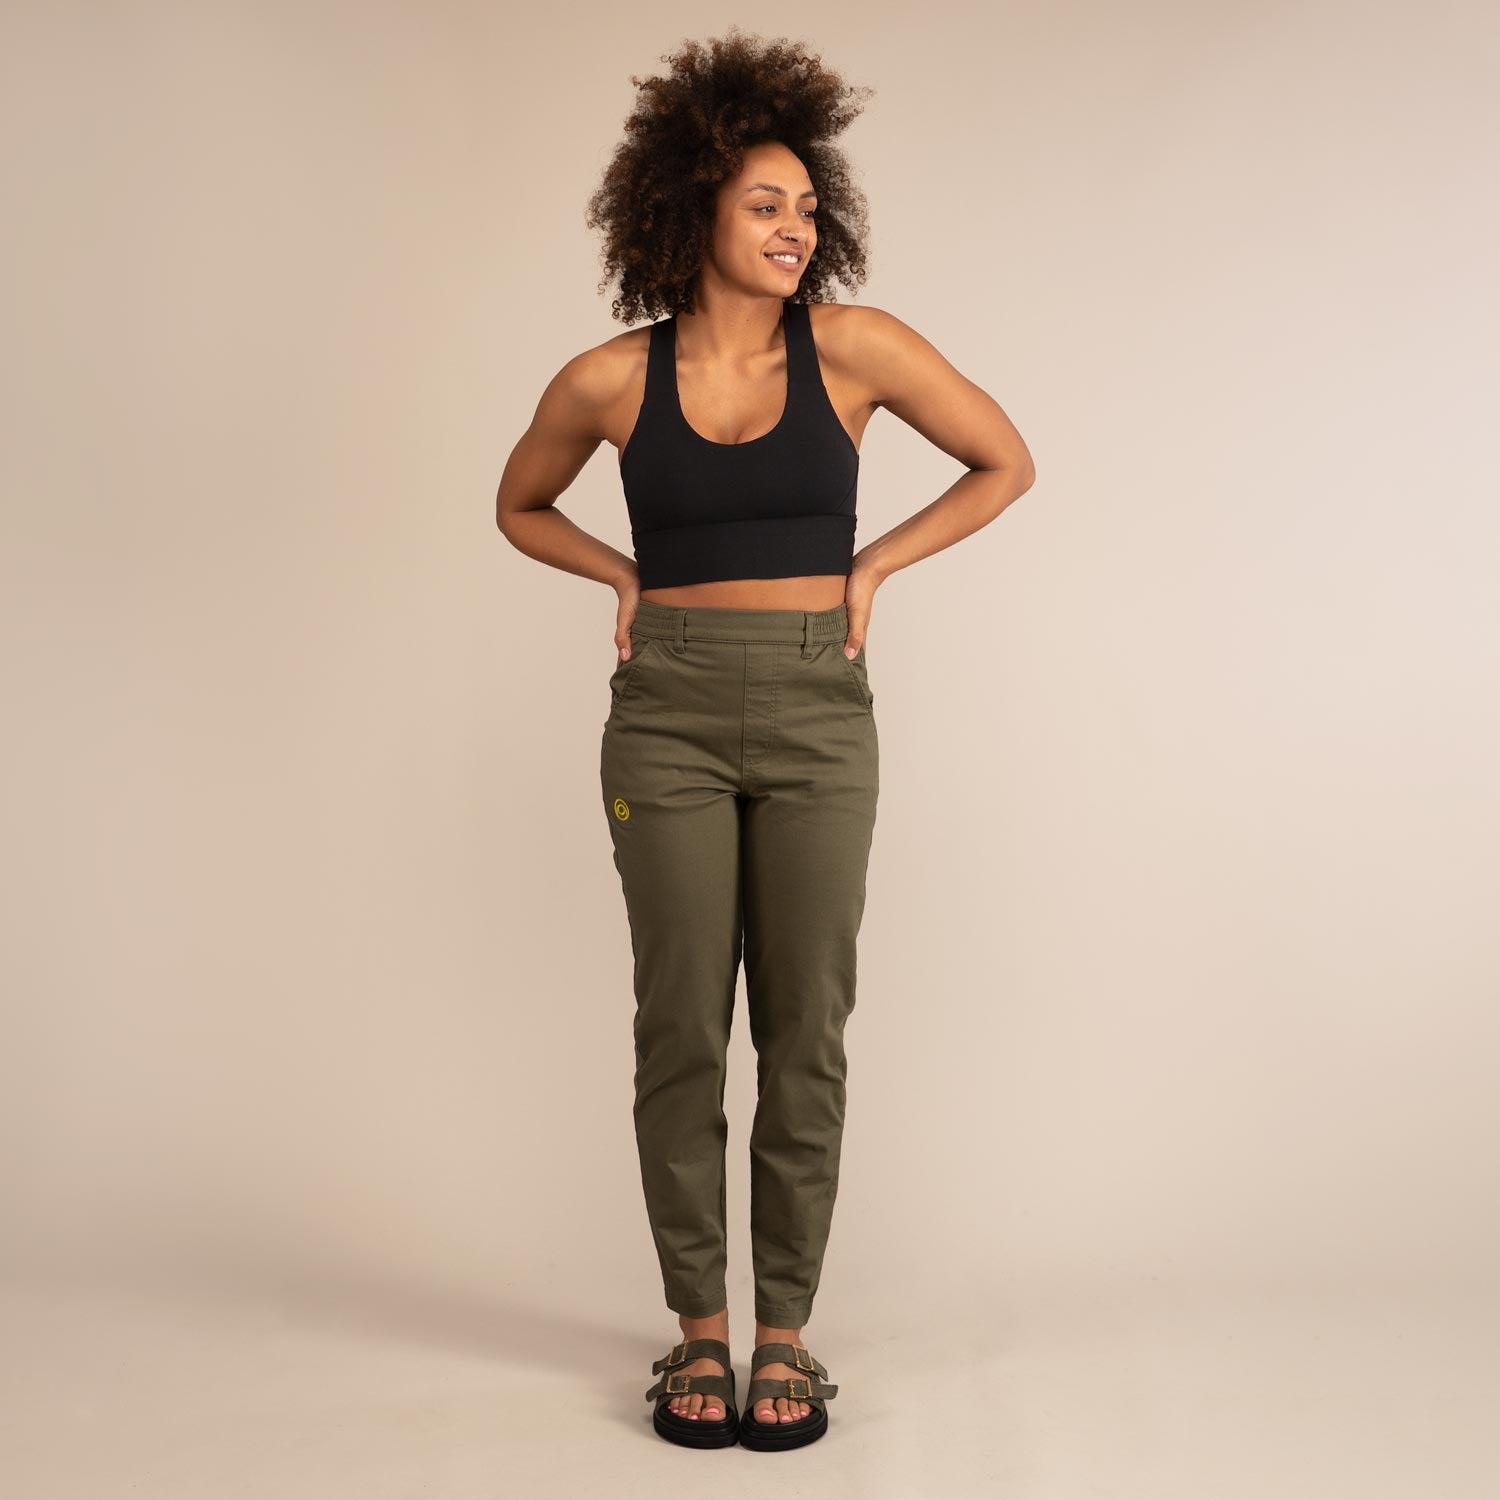 LARK Chinos | Organic Cotton Flexible Chinos | 3RD ROCK Clothing -  Kendal is 5ft 7 with a 28" waist, 38" hips and wears a size 30/RL F